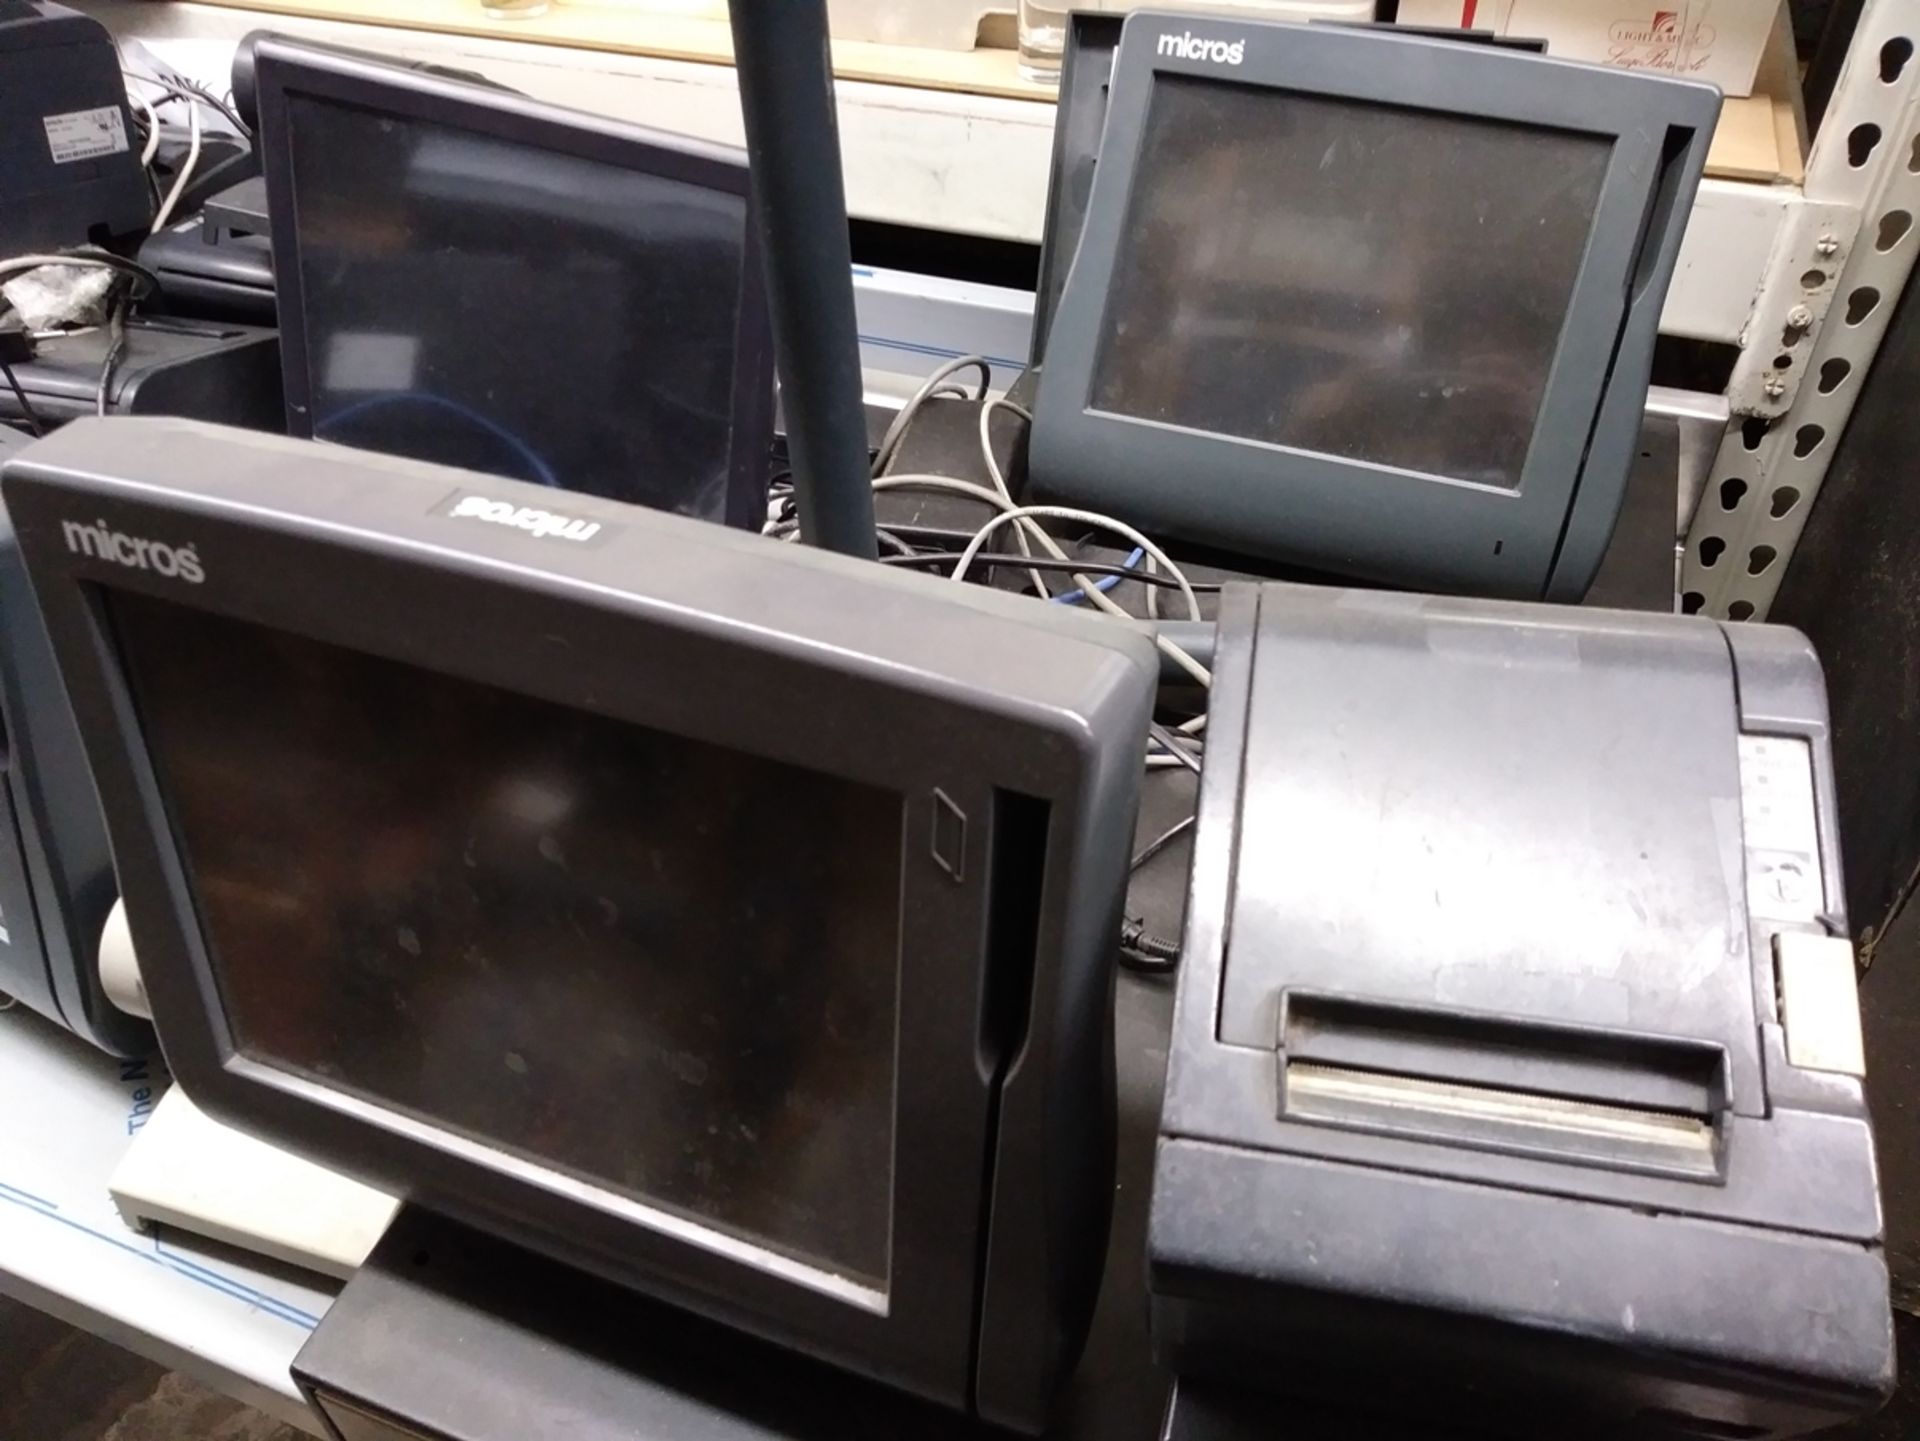 ENTIRE POS SYSTEM - INCLUDES 6 MICROS TOUCHSCREEN MONITORS, 12 RECEIPT PRINTERS, 2 CASH DRAWERS - Image 3 of 5